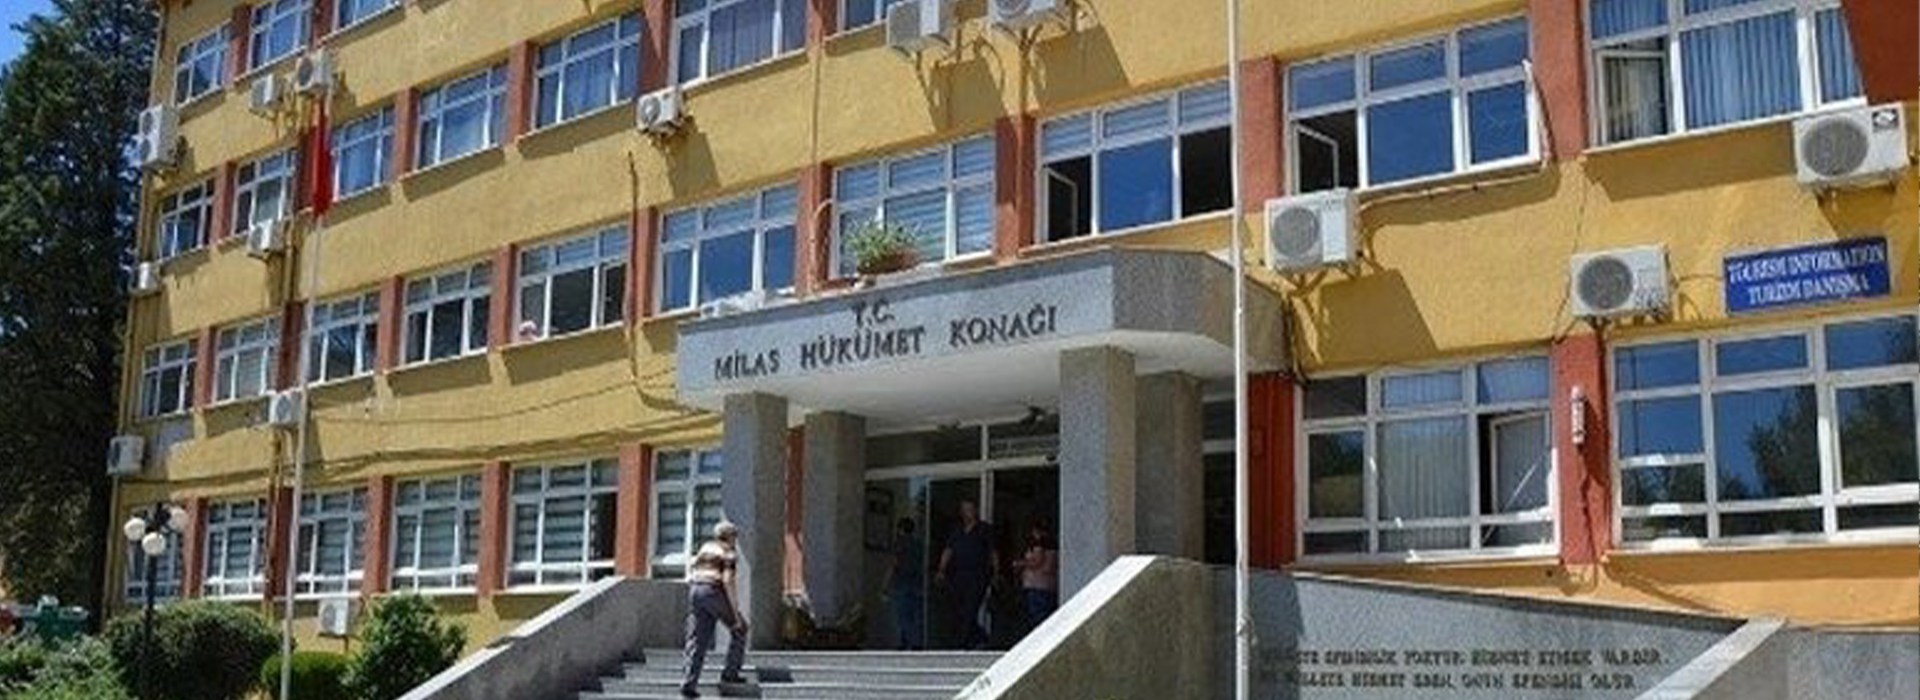 MILAS DISTRICT GOVERNMENT OFFICE